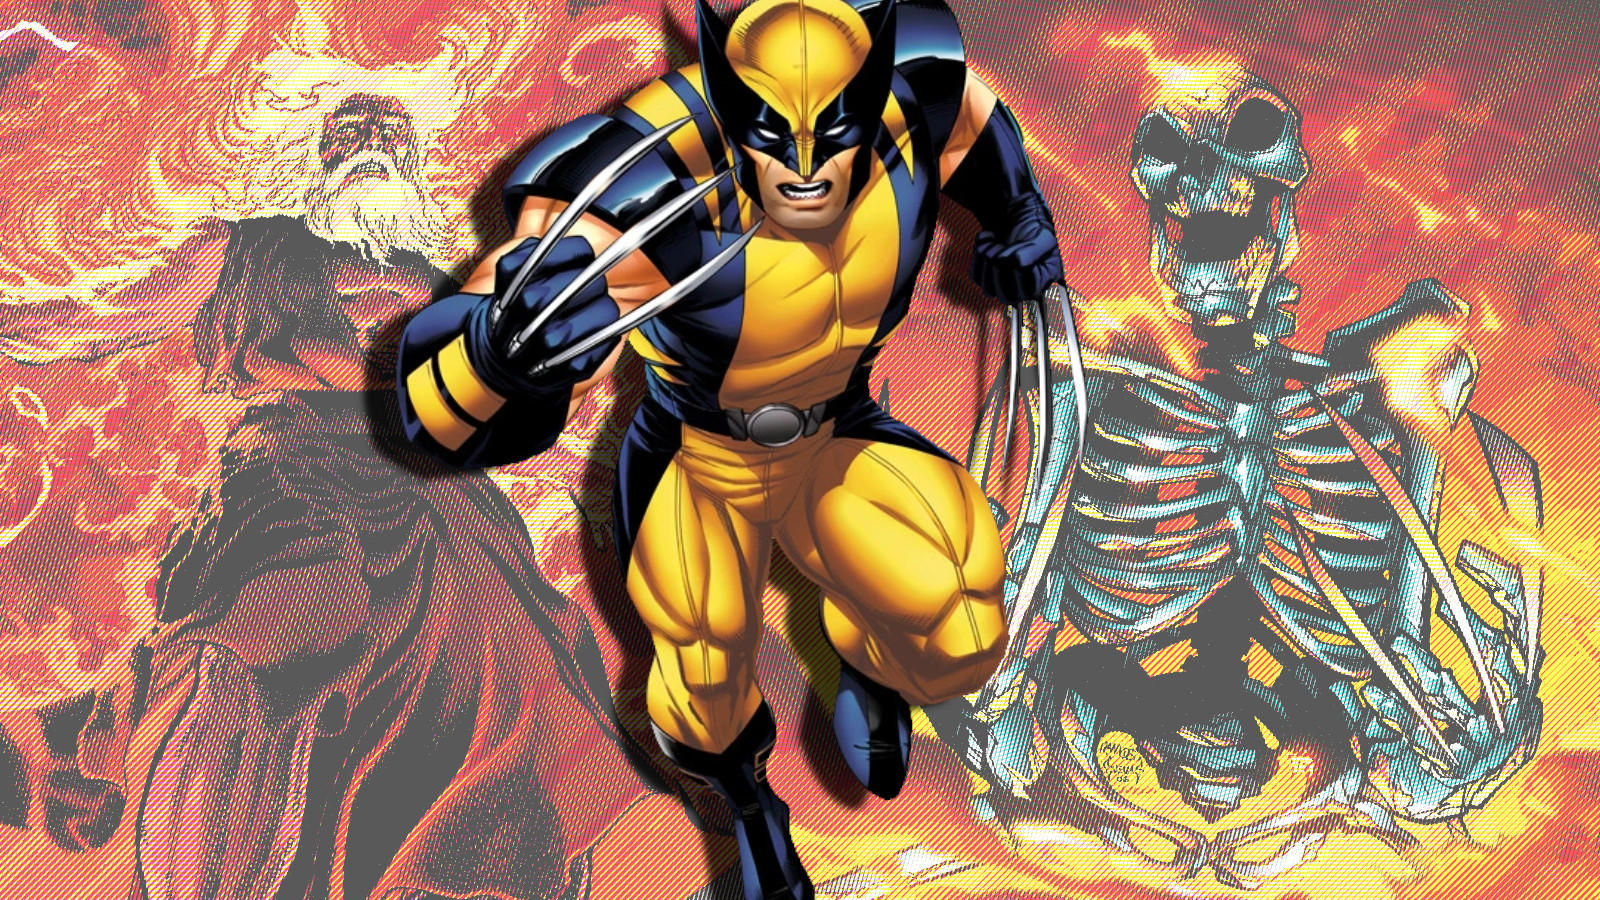 Collage of Wolverine throughout the years.